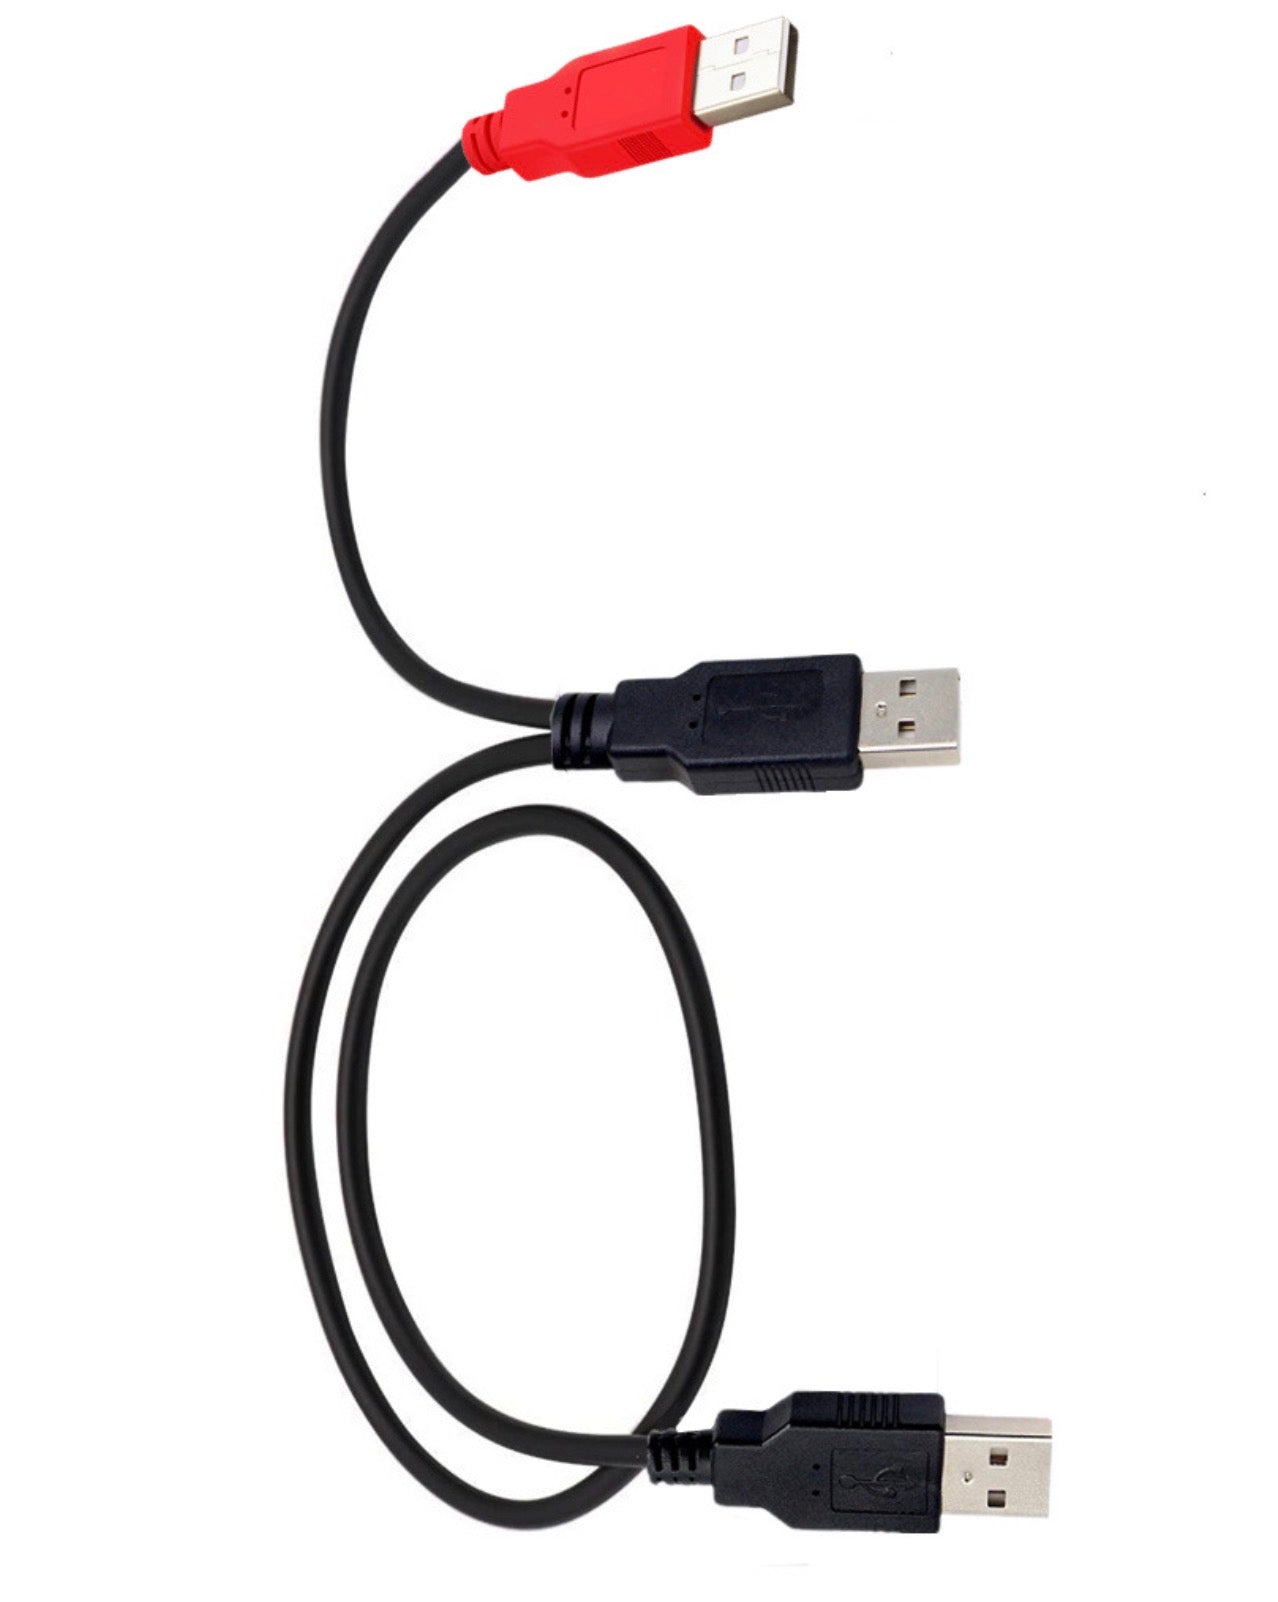 USB 2.0 A Male to Dual USB 2.0 A Male Y Splitter Cable with Extra Power Connector 0.8m